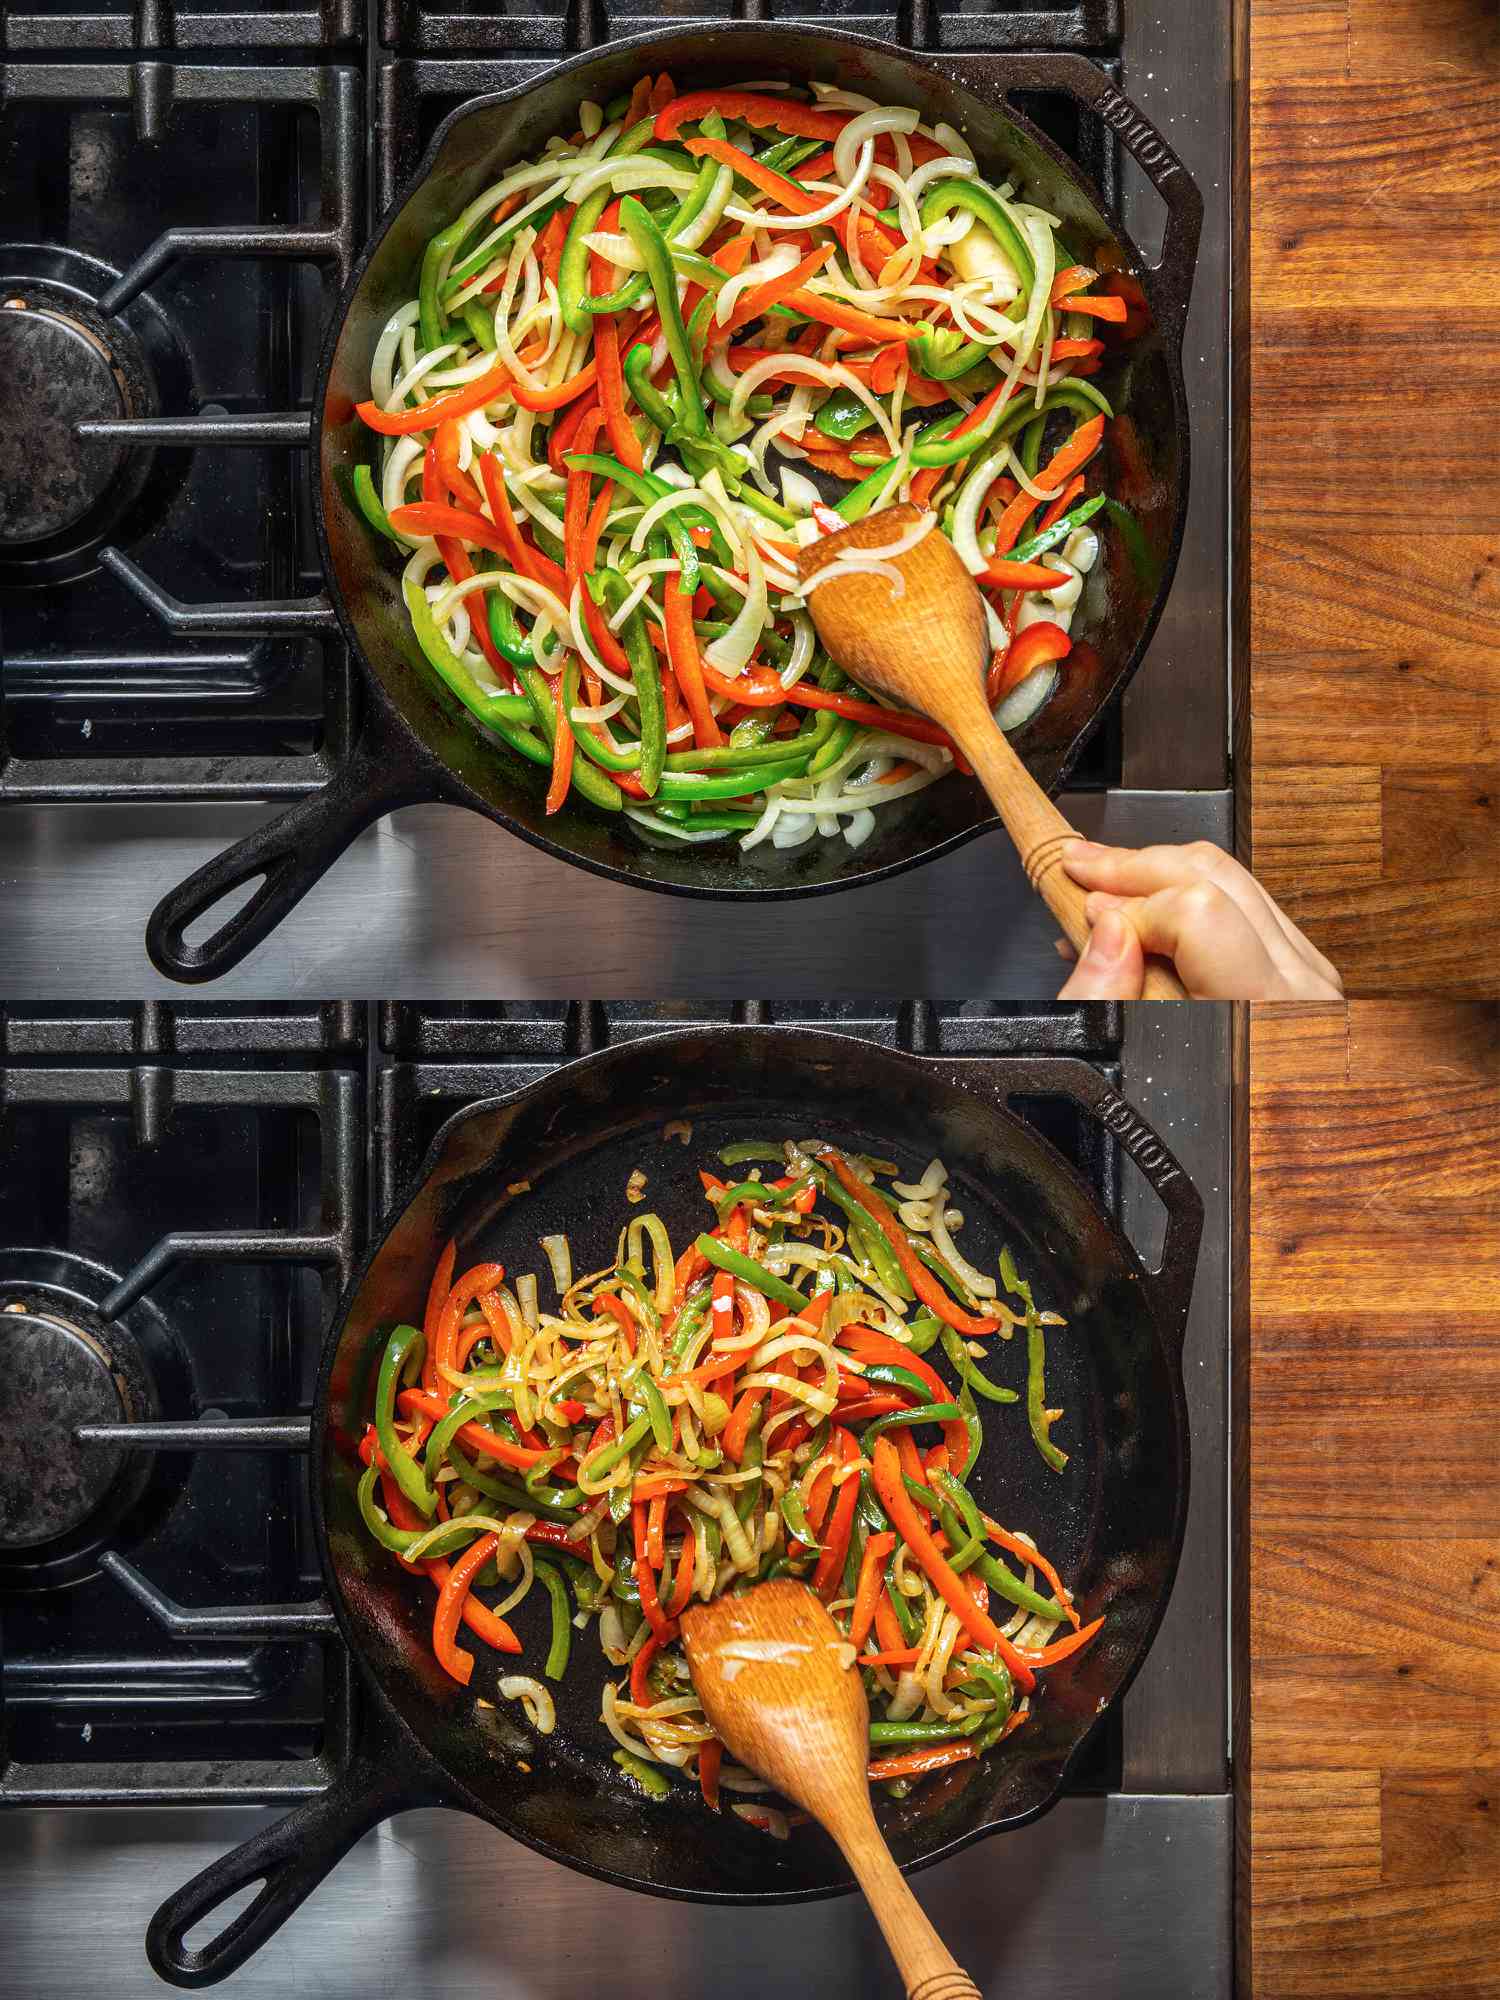 Two image collage of overhead view of cooking peppers down in a skillet